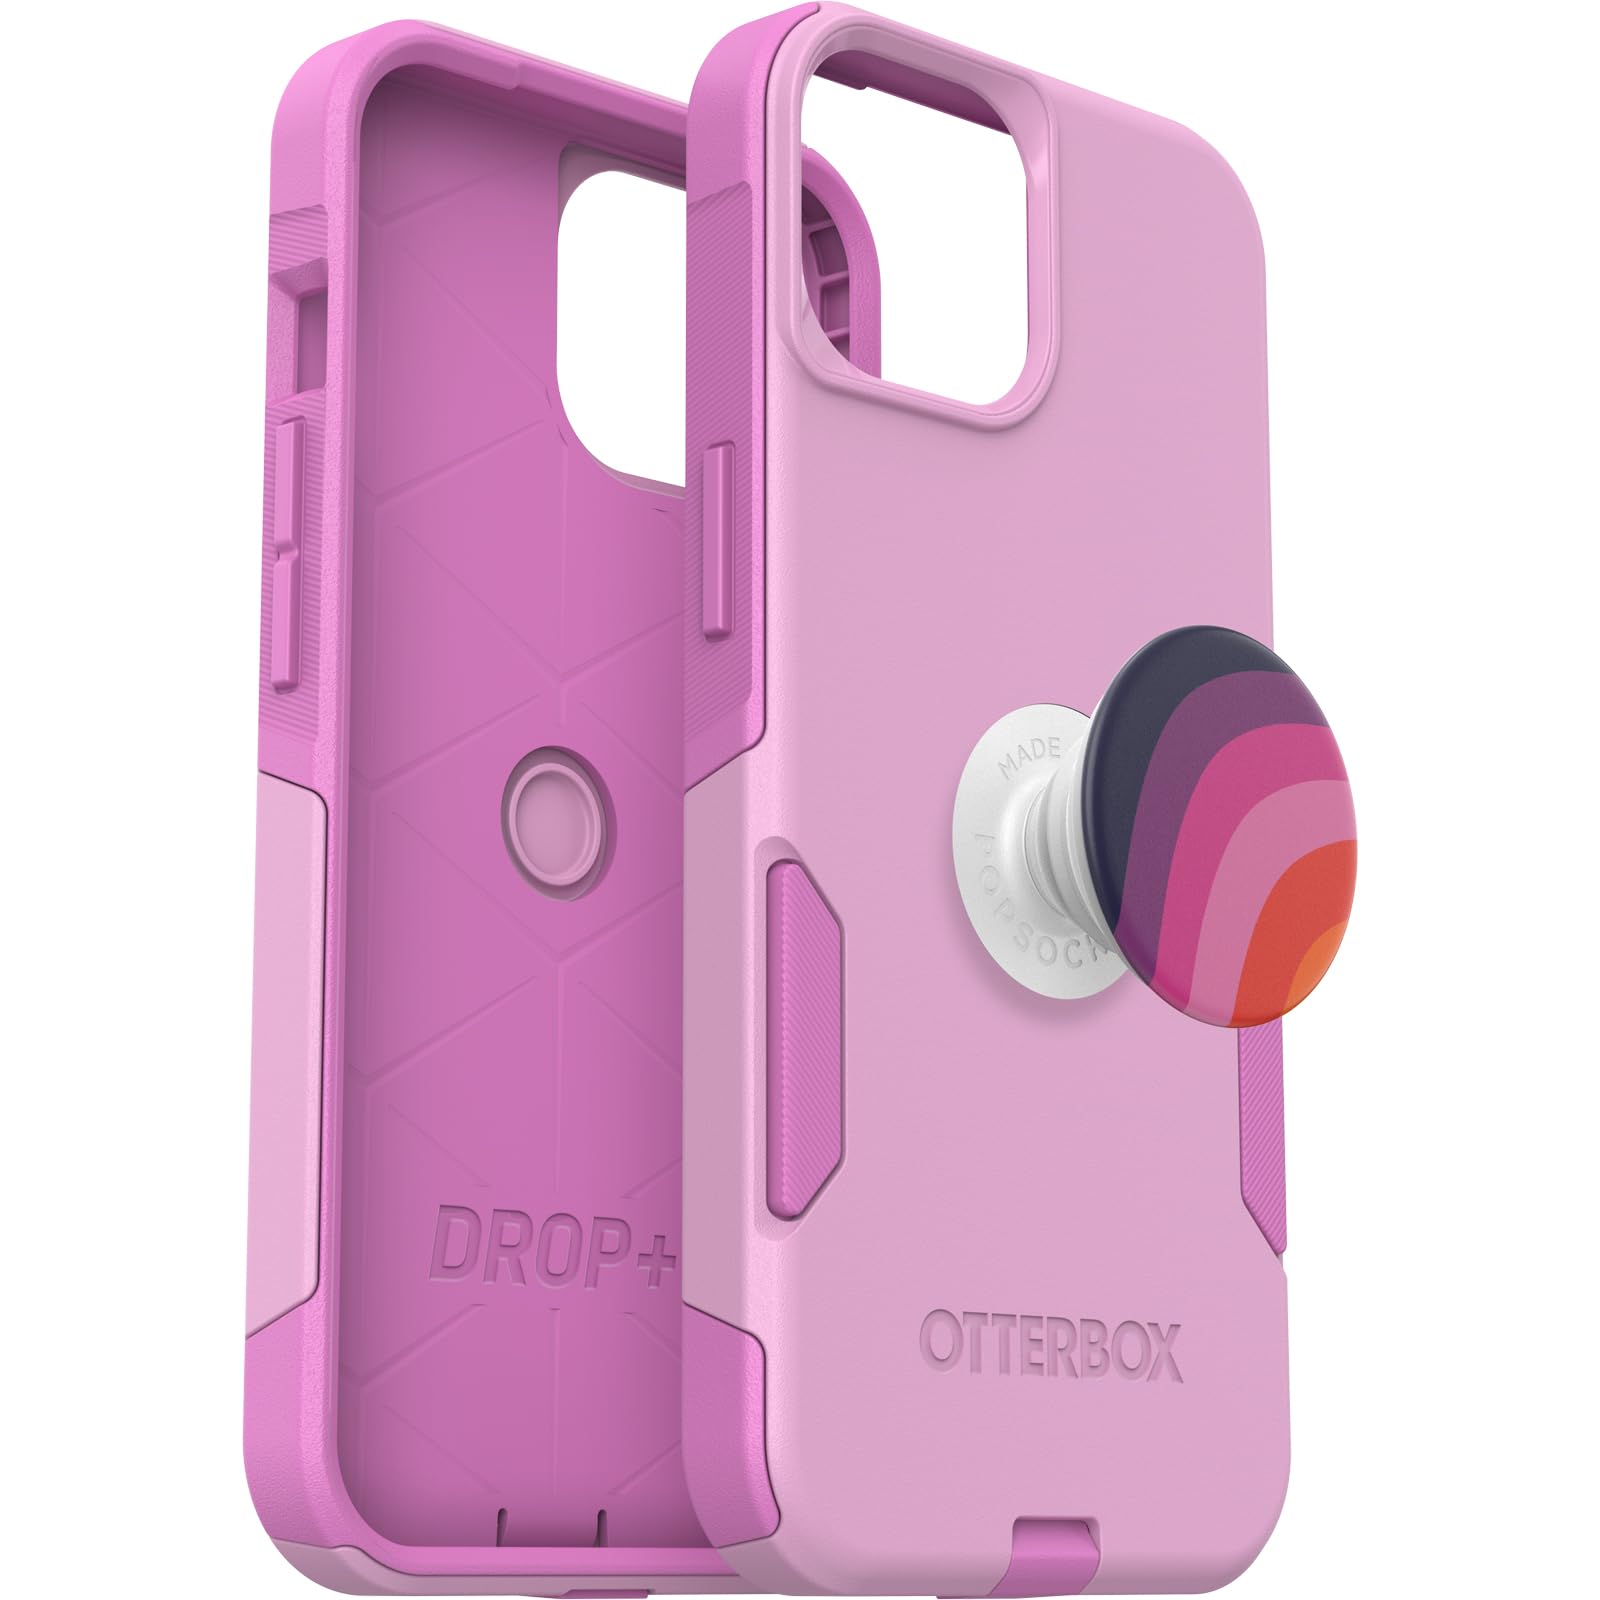 Bundle: OtterBox STRAWBERRY Commuter Series Case - (RUN WILDFLOWER) + PopSockets PopGrip - (PLUM STRIPE), slim & tough, pocket-friendly, with port protection, PopGrip included